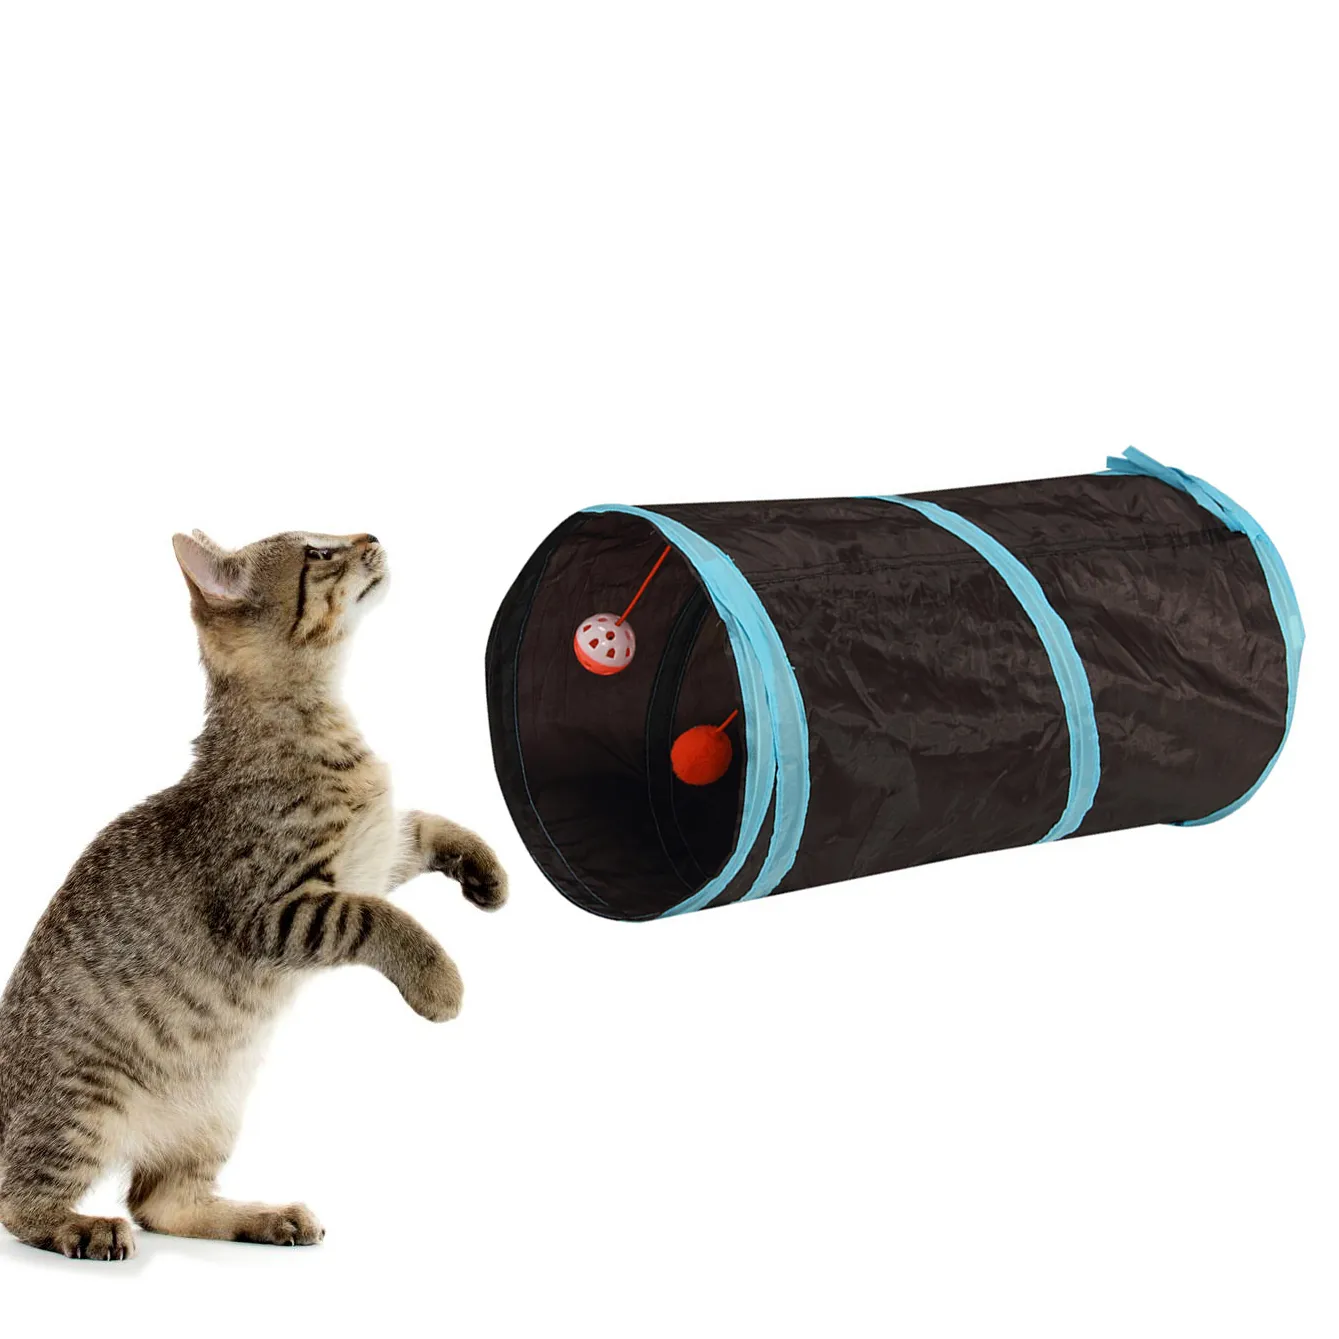 fashion Pet train dog cat tunnel Collapsible passage Cat Toys Training Home Pet Product gift drop ship